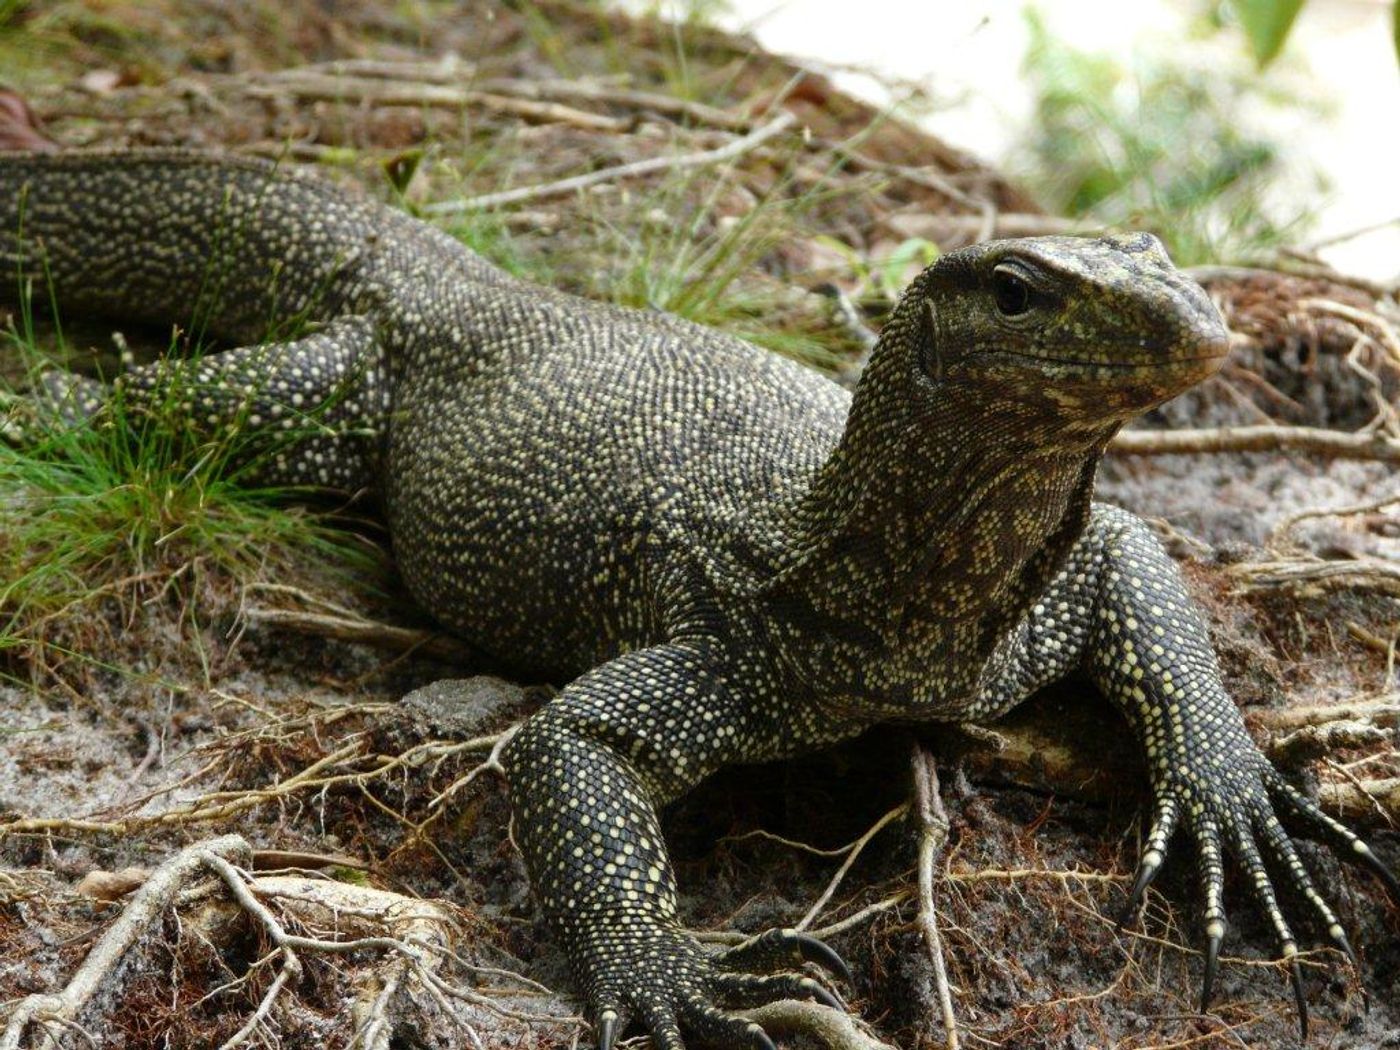 Monitor lizards have been trained to stop eating the deadly cane toads.